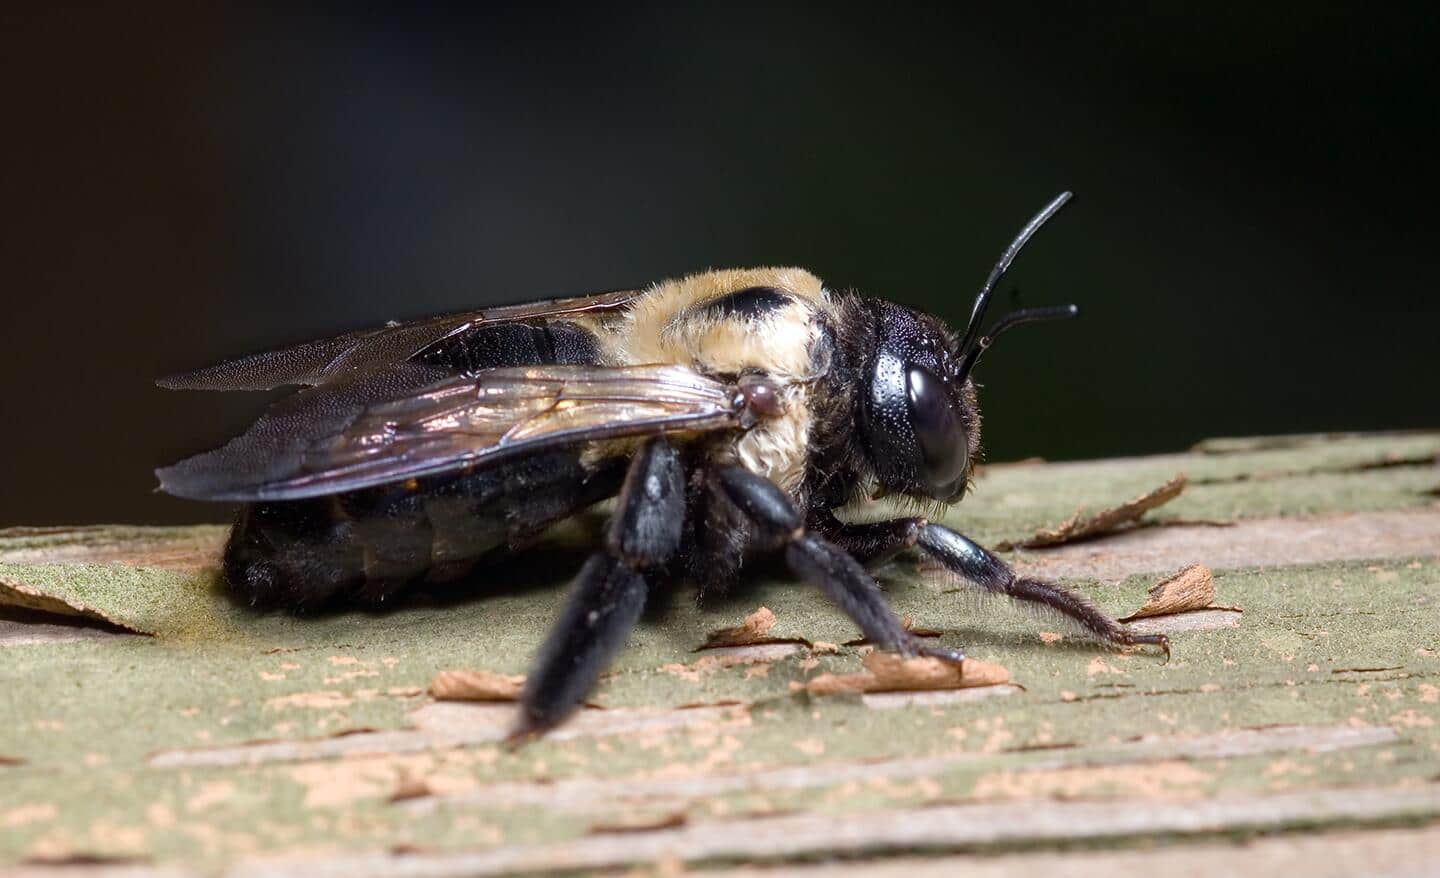 A yellow and black wood bee stands on a piece of wood.